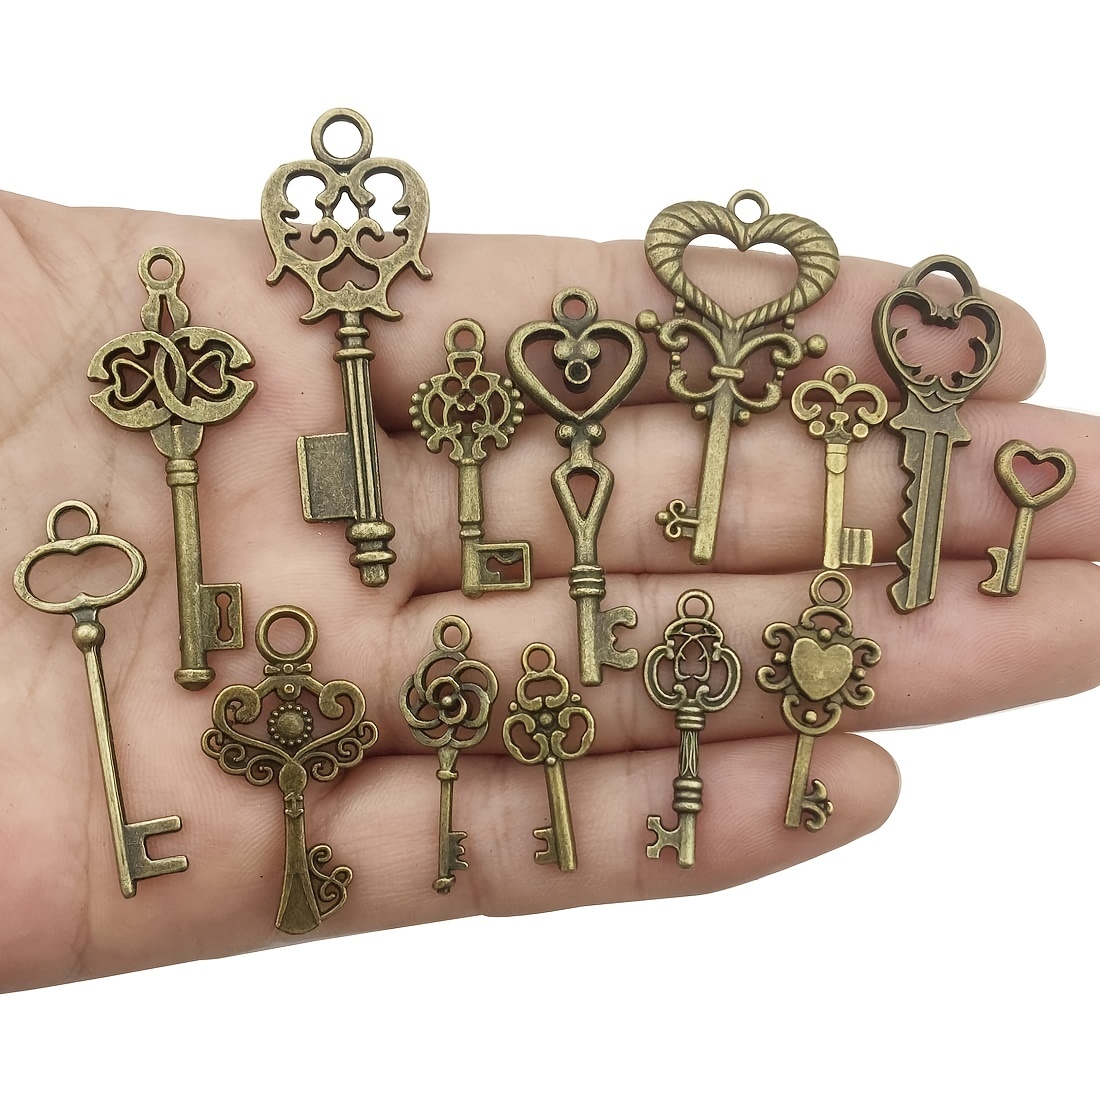  Salome Idea Skeleton Key Charm Set in Antique Copper (48  Charms) 6 Styles – Vintage Style Key Charms (AntiqueGold) : Arts, Crafts &  Sewing